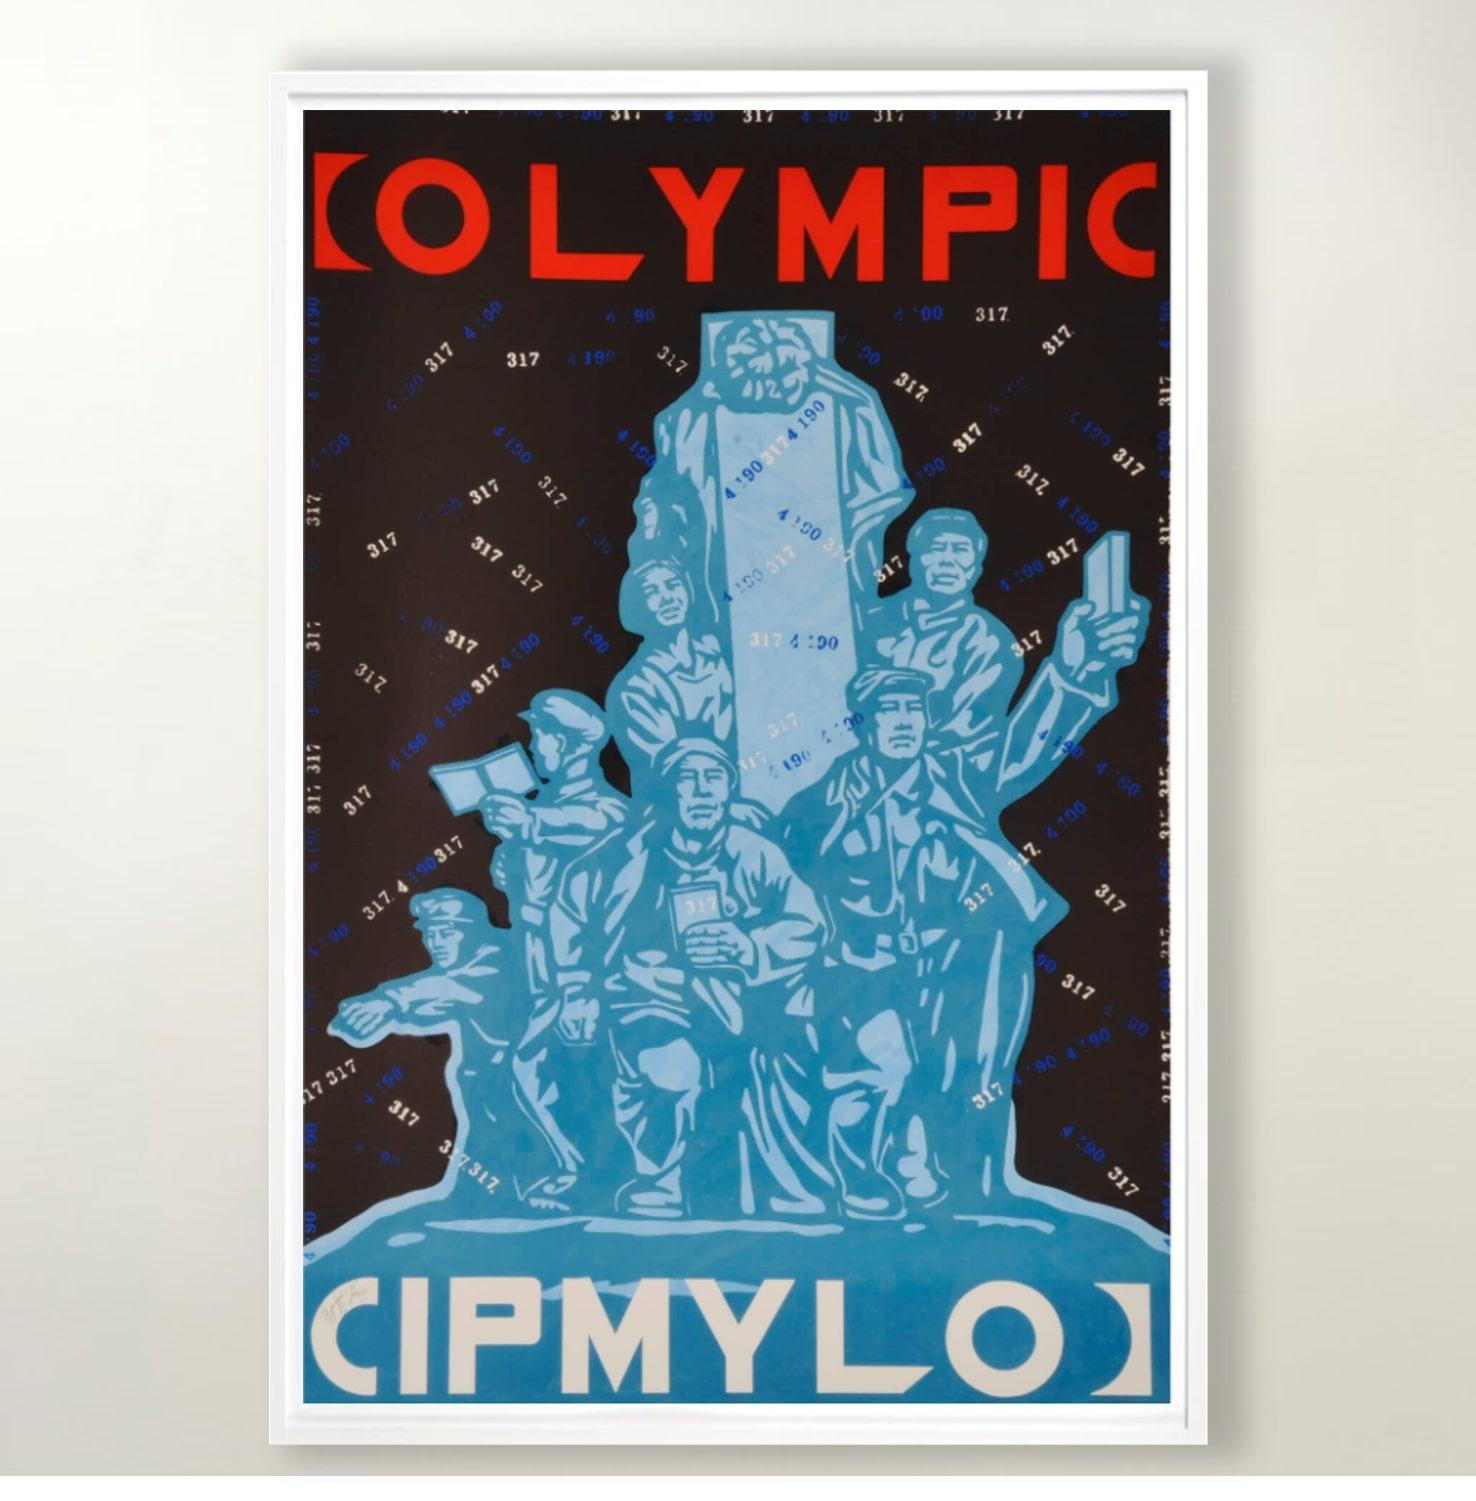 Olmypic-Cipmylo - Contemporary, 21st Century, Lithograph, Limited Edition - Blue Figurative Print by Wang Guangyi